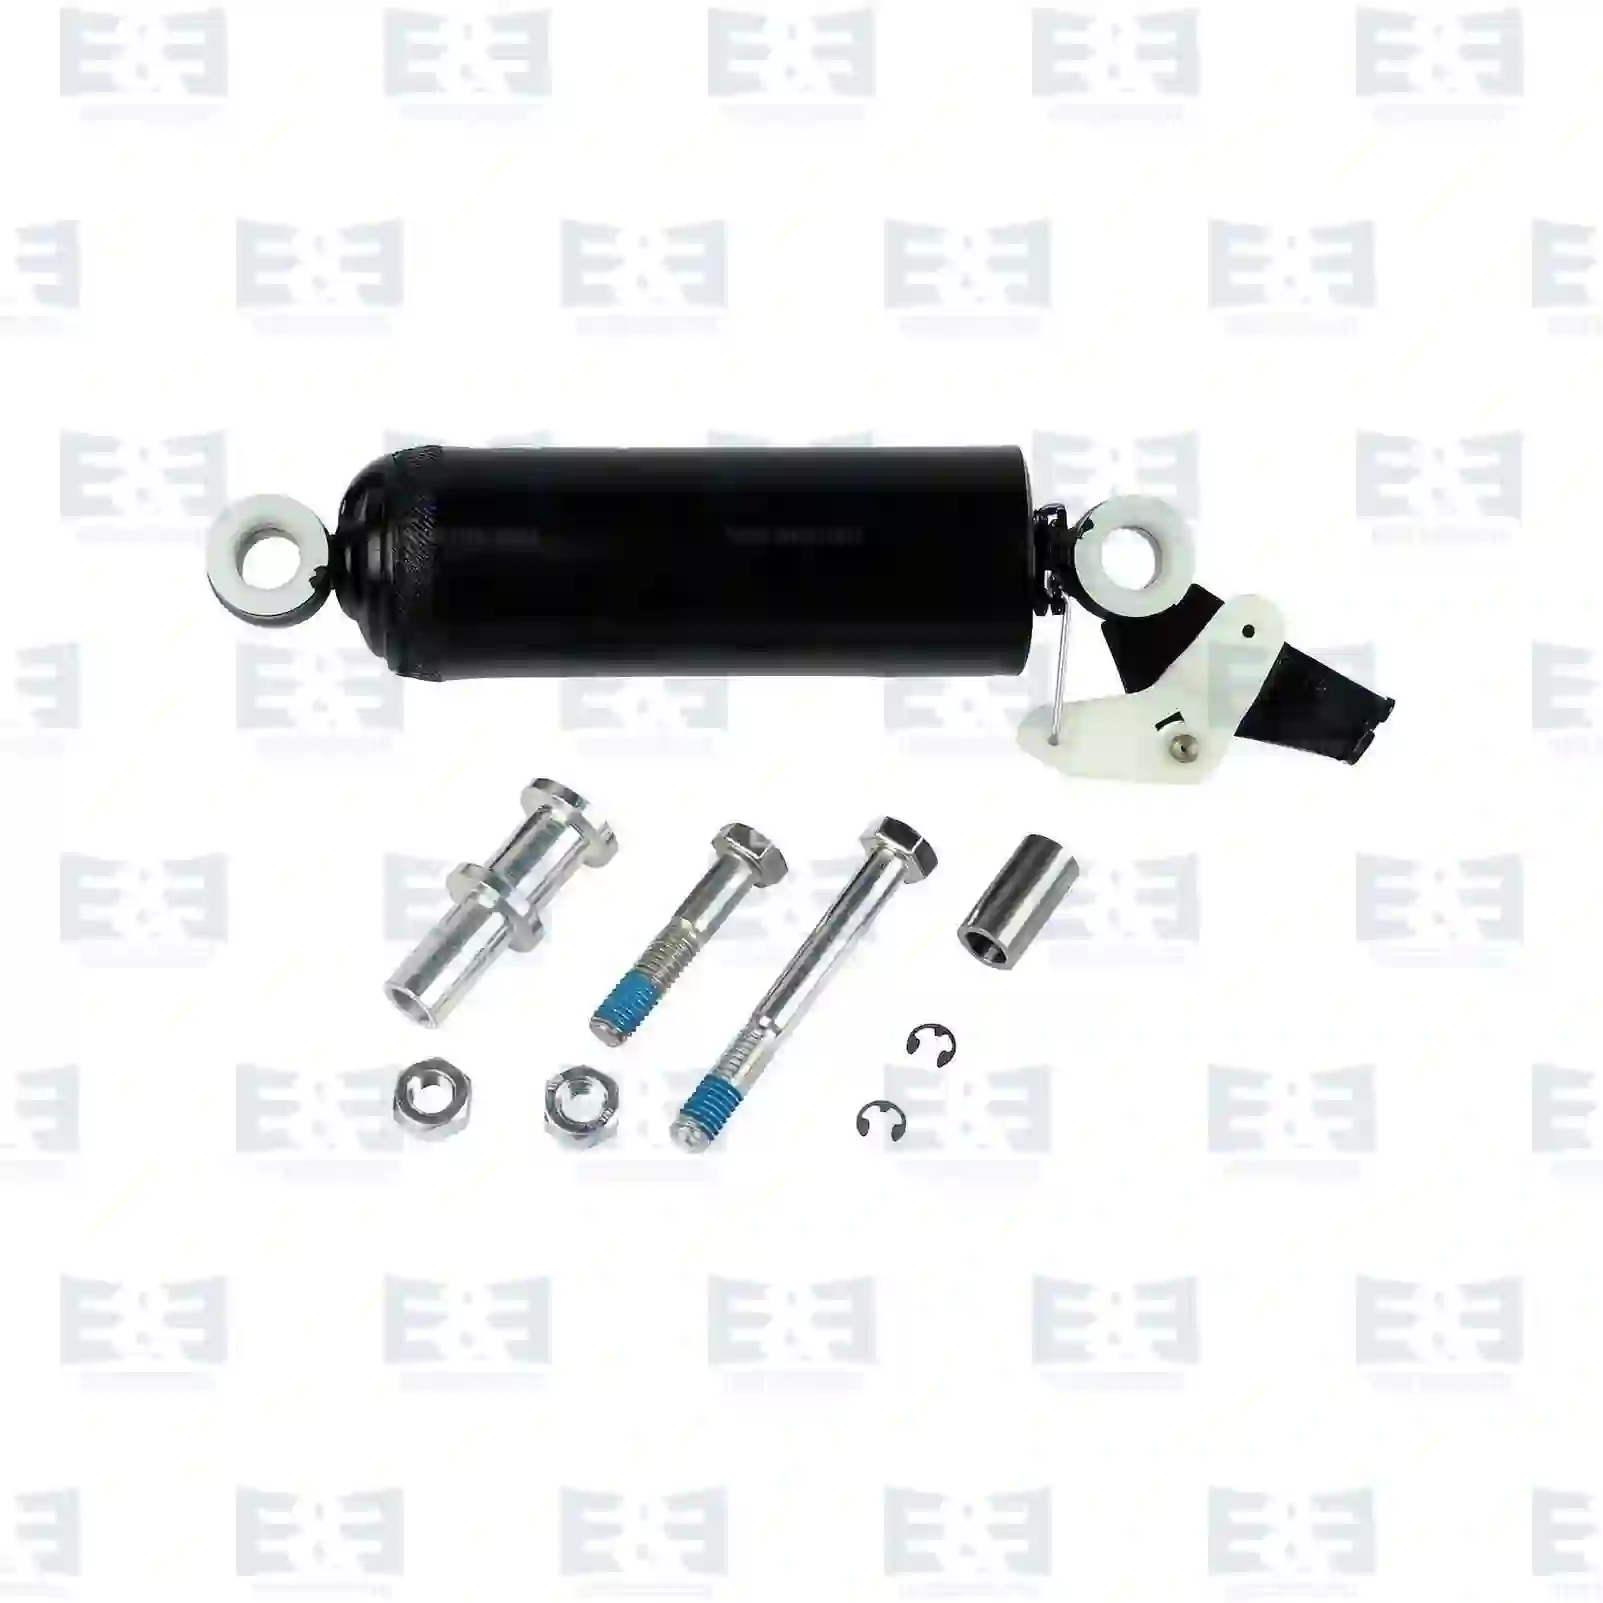  Shock absorber, seat, without accessories || E&E Truck Spare Parts | Truck Spare Parts, Auotomotive Spare Parts